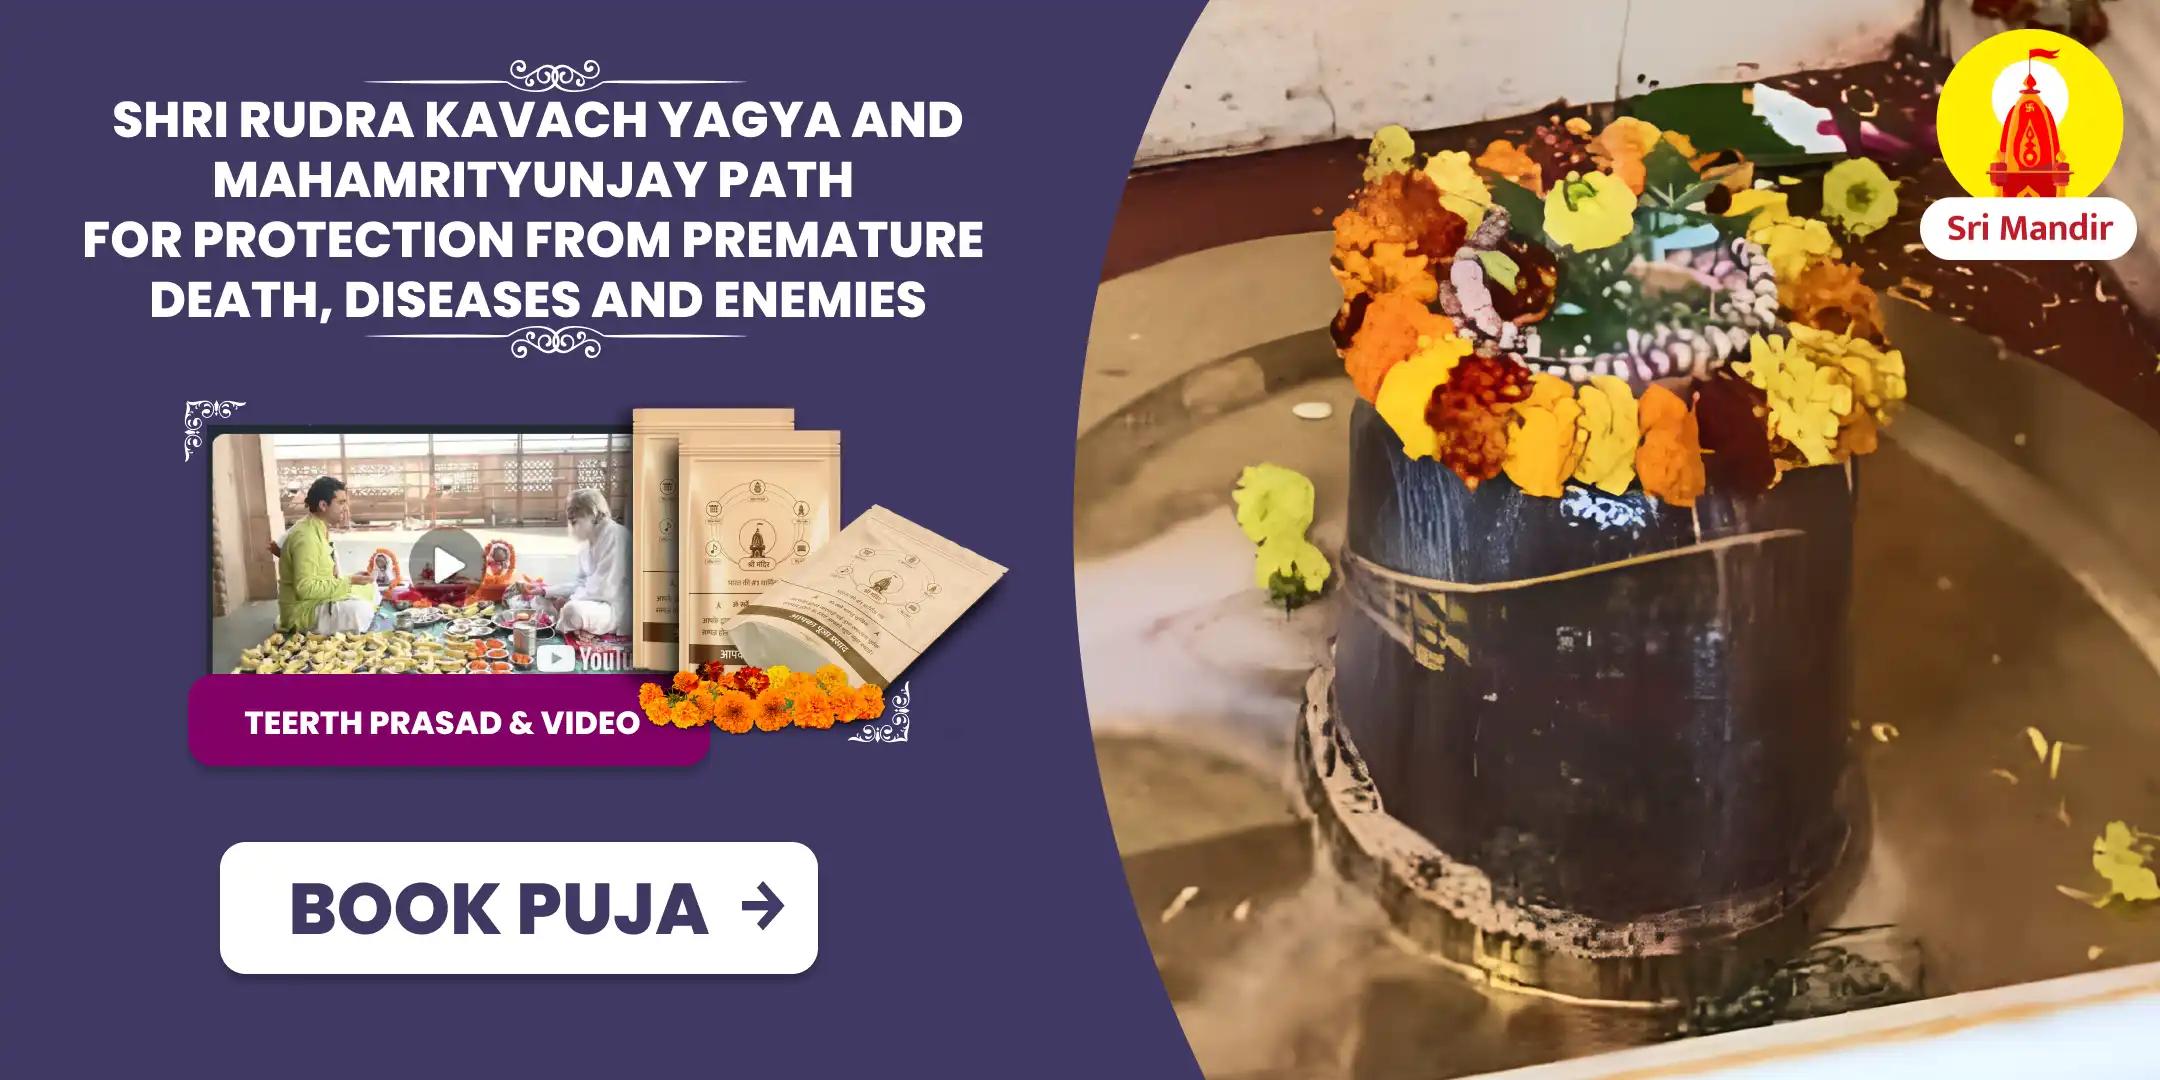 Shri Rudra Kavach Yagya and Mahamrityunjay Path For Protection from Premature Death, Diseases and Enemies